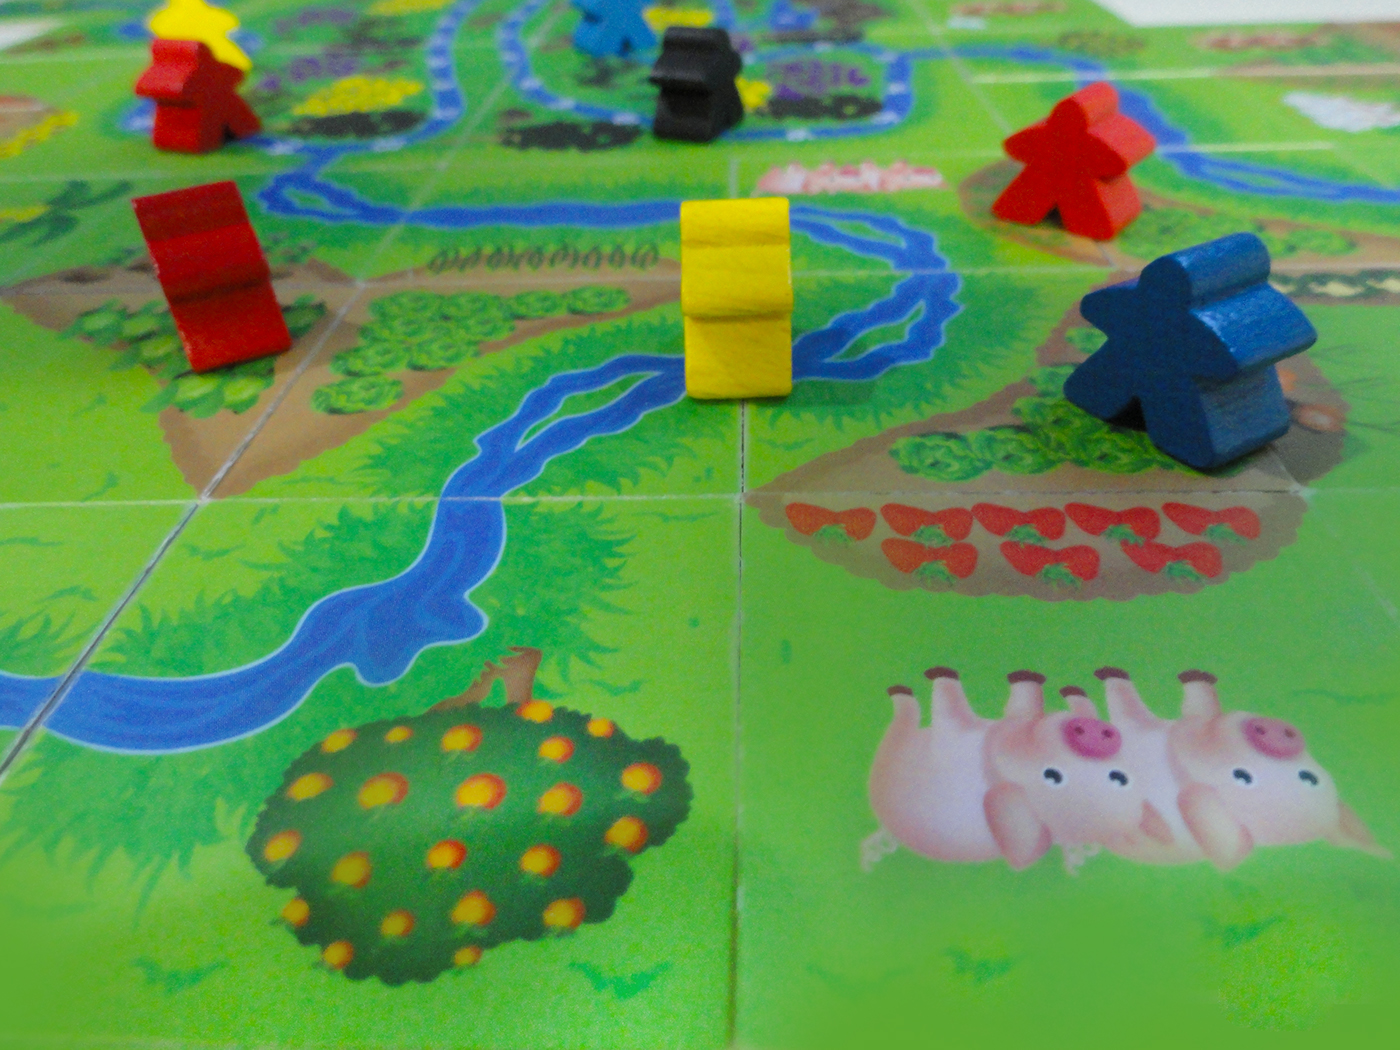 board game game biomimicry permaculture Nature child kids tabletop jogo natureza